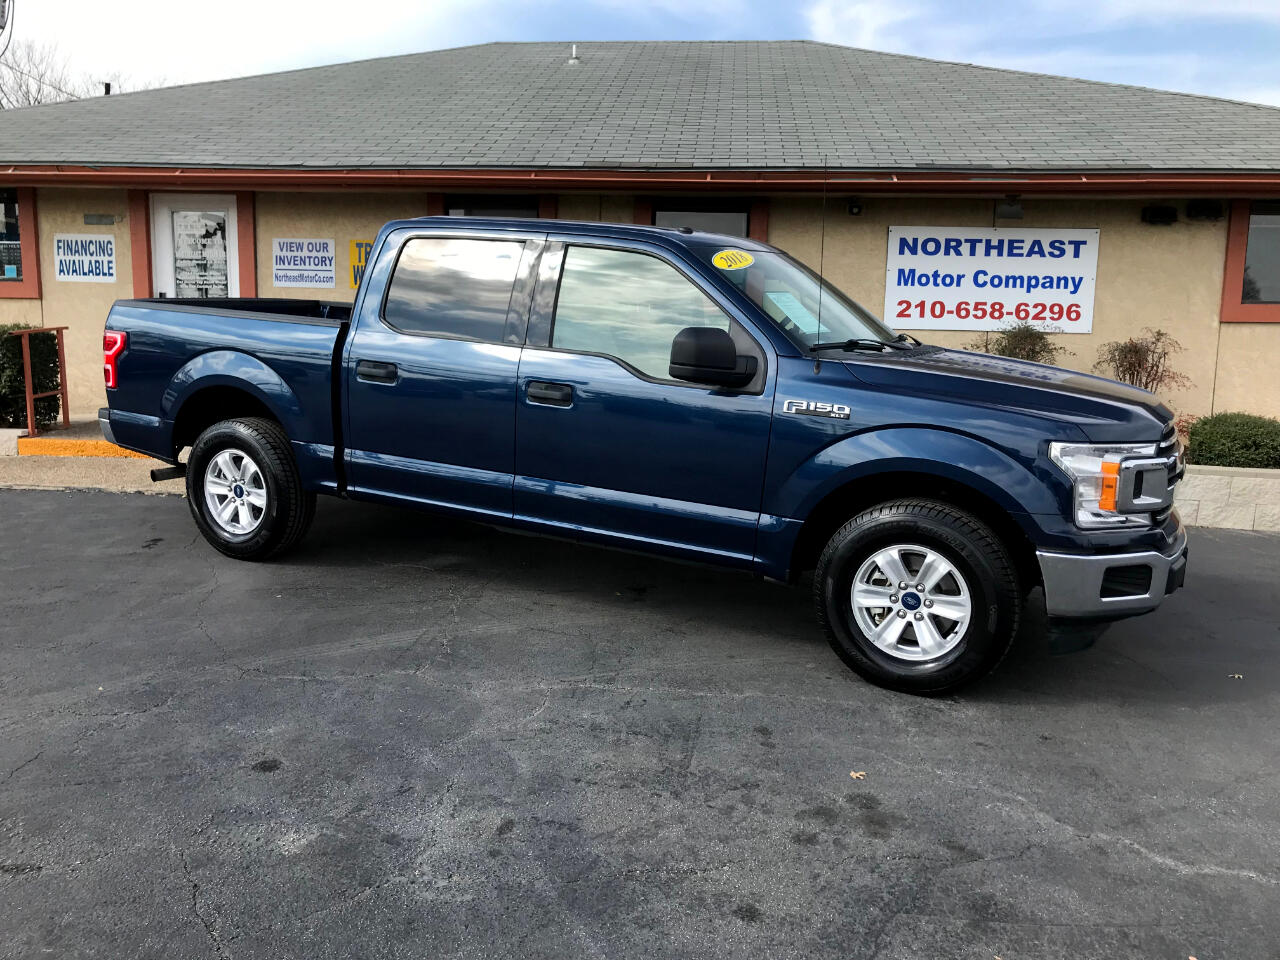 Ford F-150 XLT SuperCrew 5.5-ft. Bed 2WD 2018